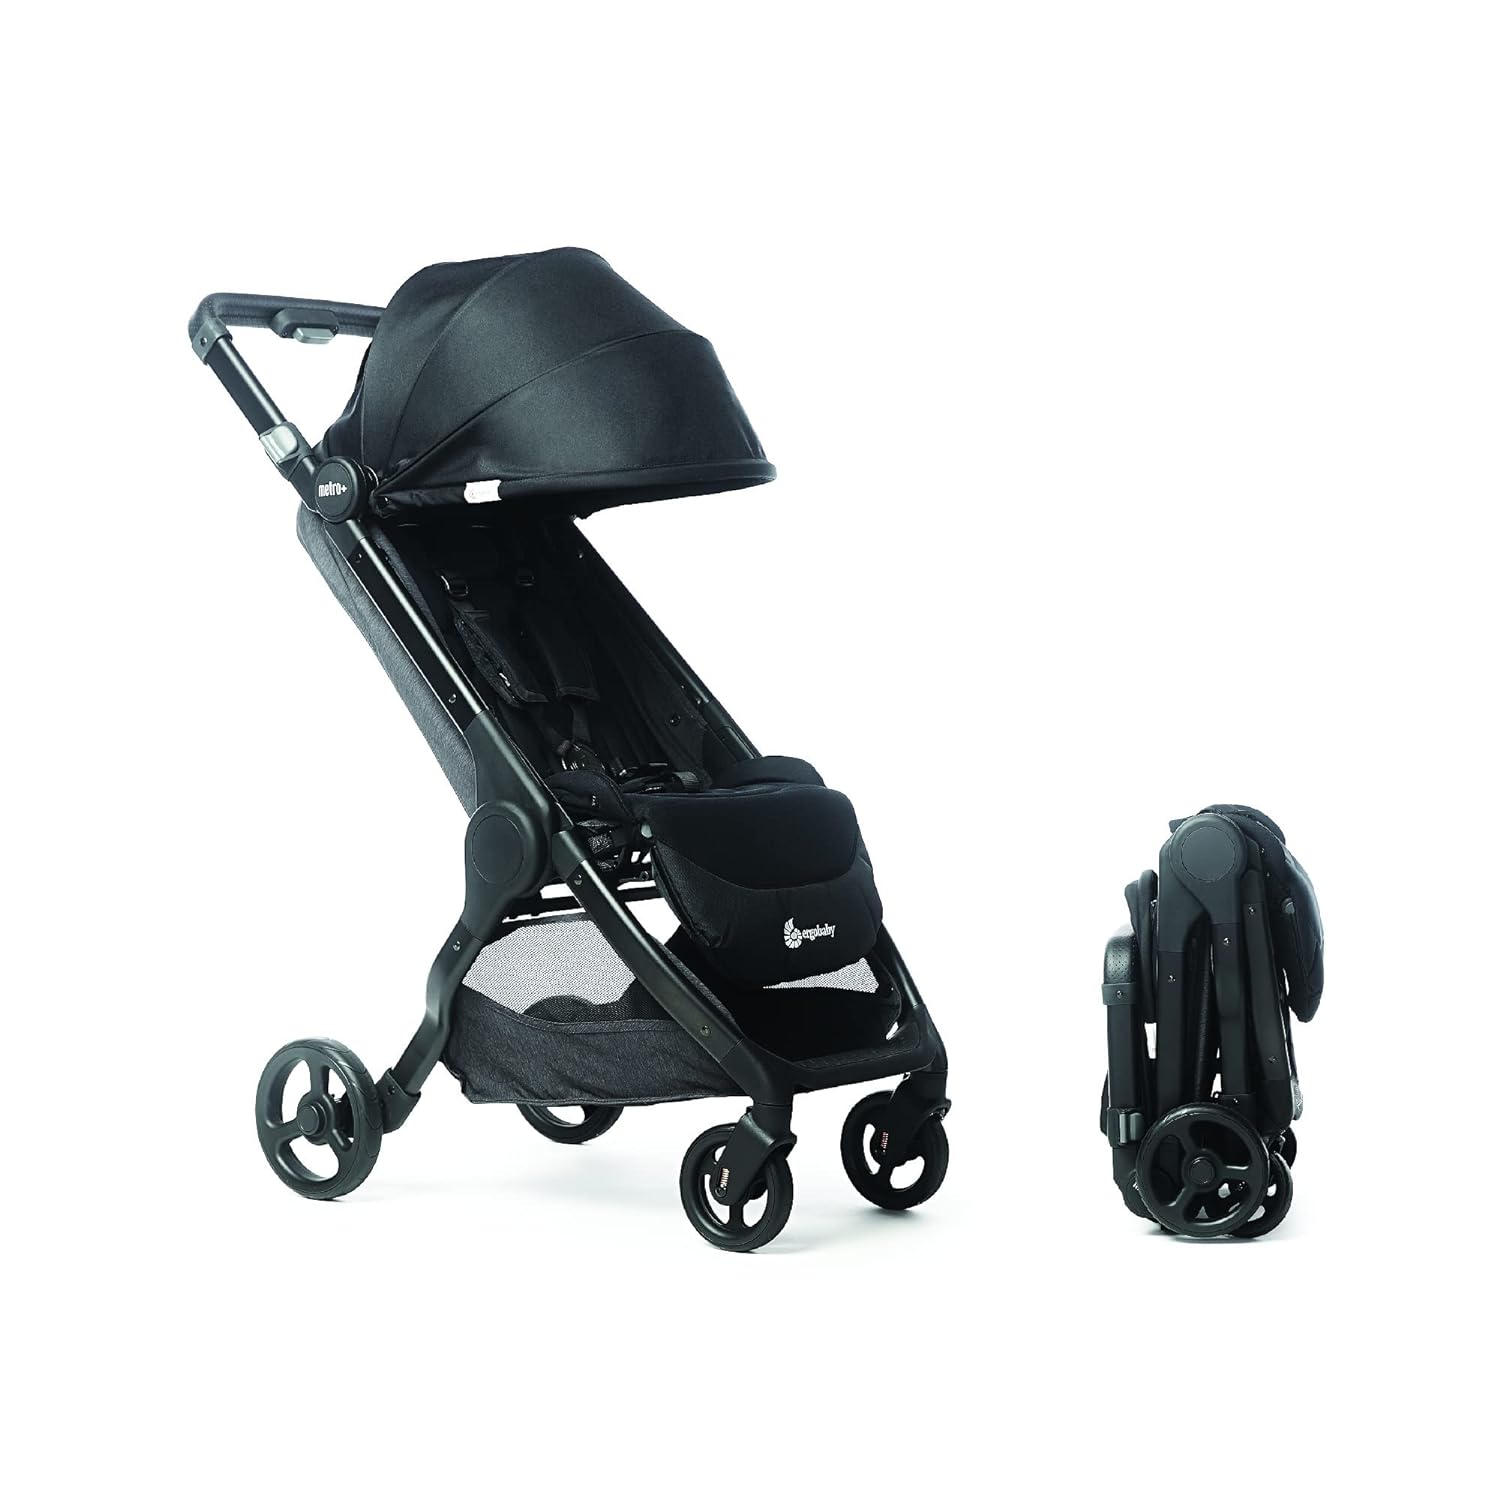 Ergobaby Metro+ Compact Baby Stroller Review